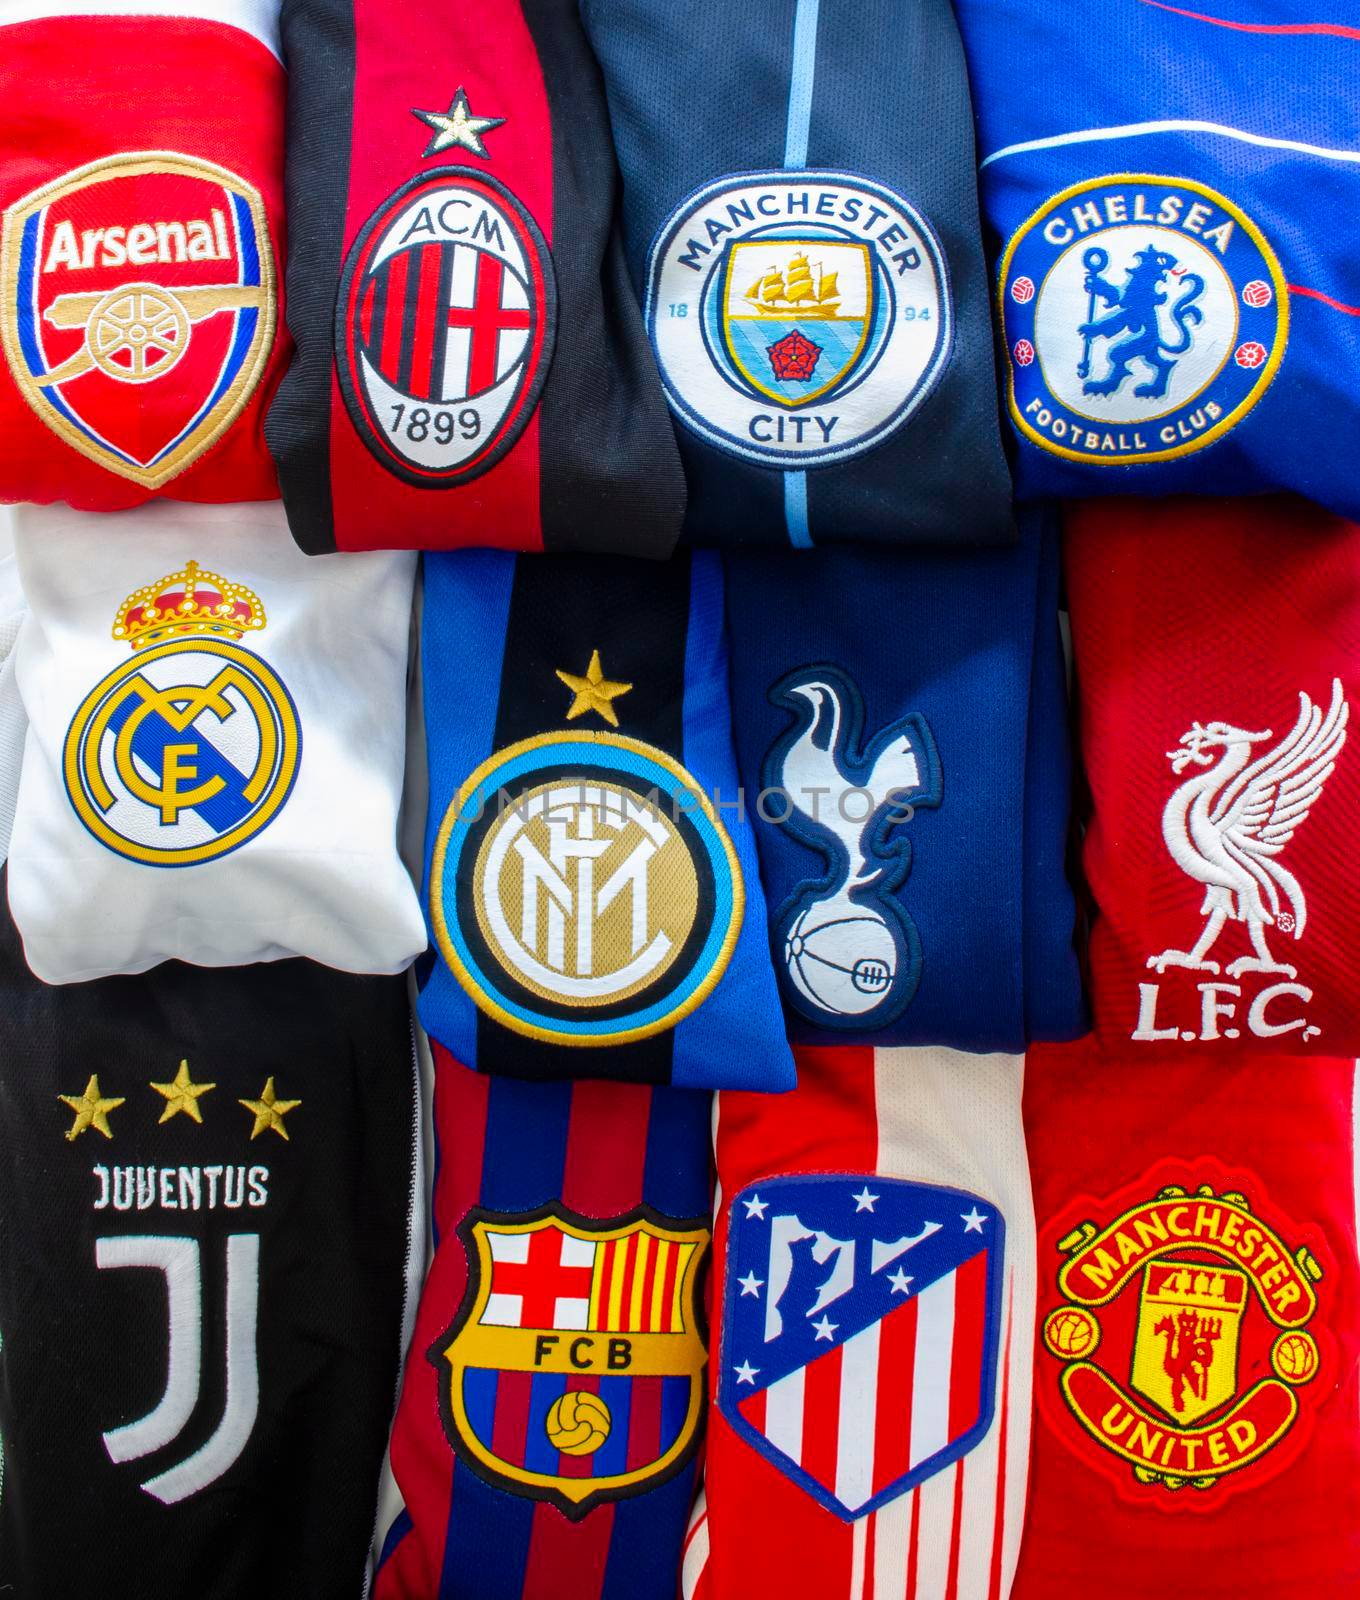 Chamartín, Madrid, Spain. April 19, 2021. Vertical view of The Super League or European Super League teams jerseys. annual club football competition to be contested by an exclusive group of top European football clubs. by oasisamuel